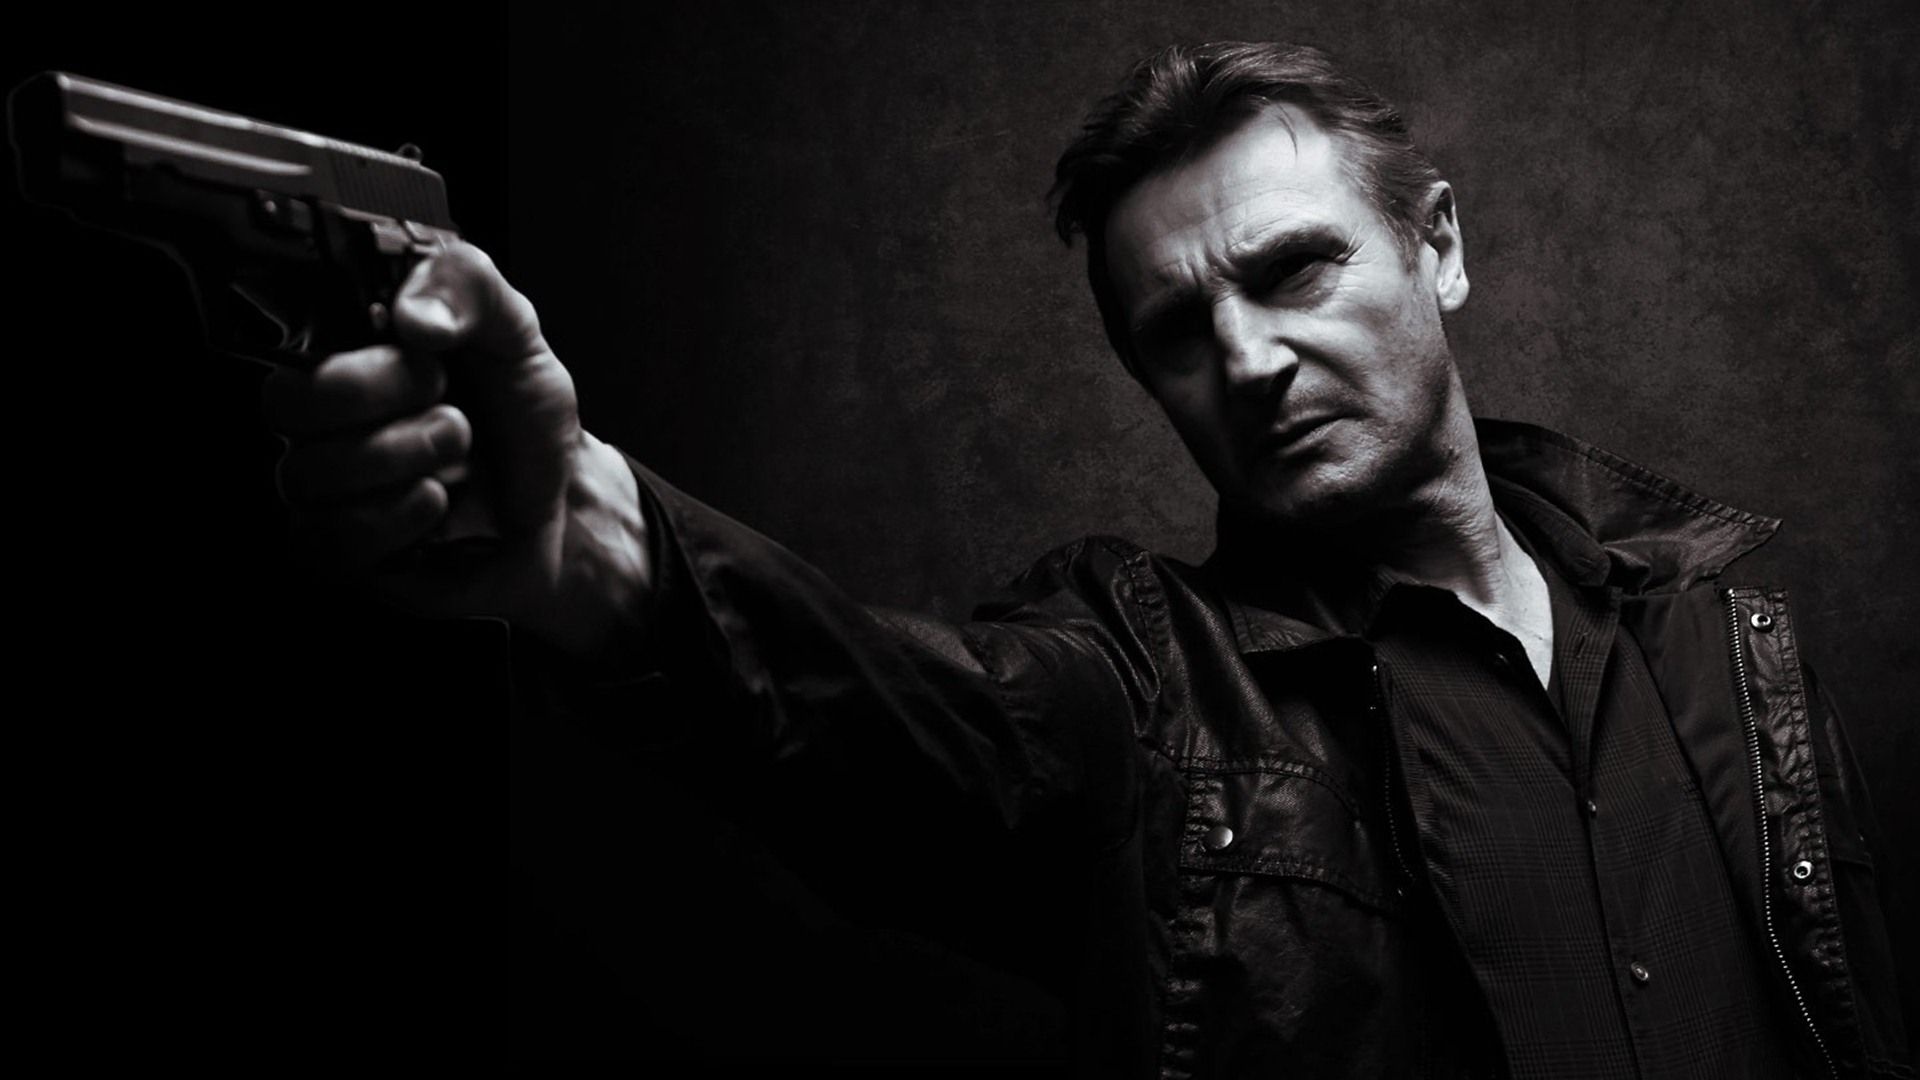 Liam Neeson, Top free wallpapers, Backgrounds, High quality, 1920x1080 Full HD Desktop